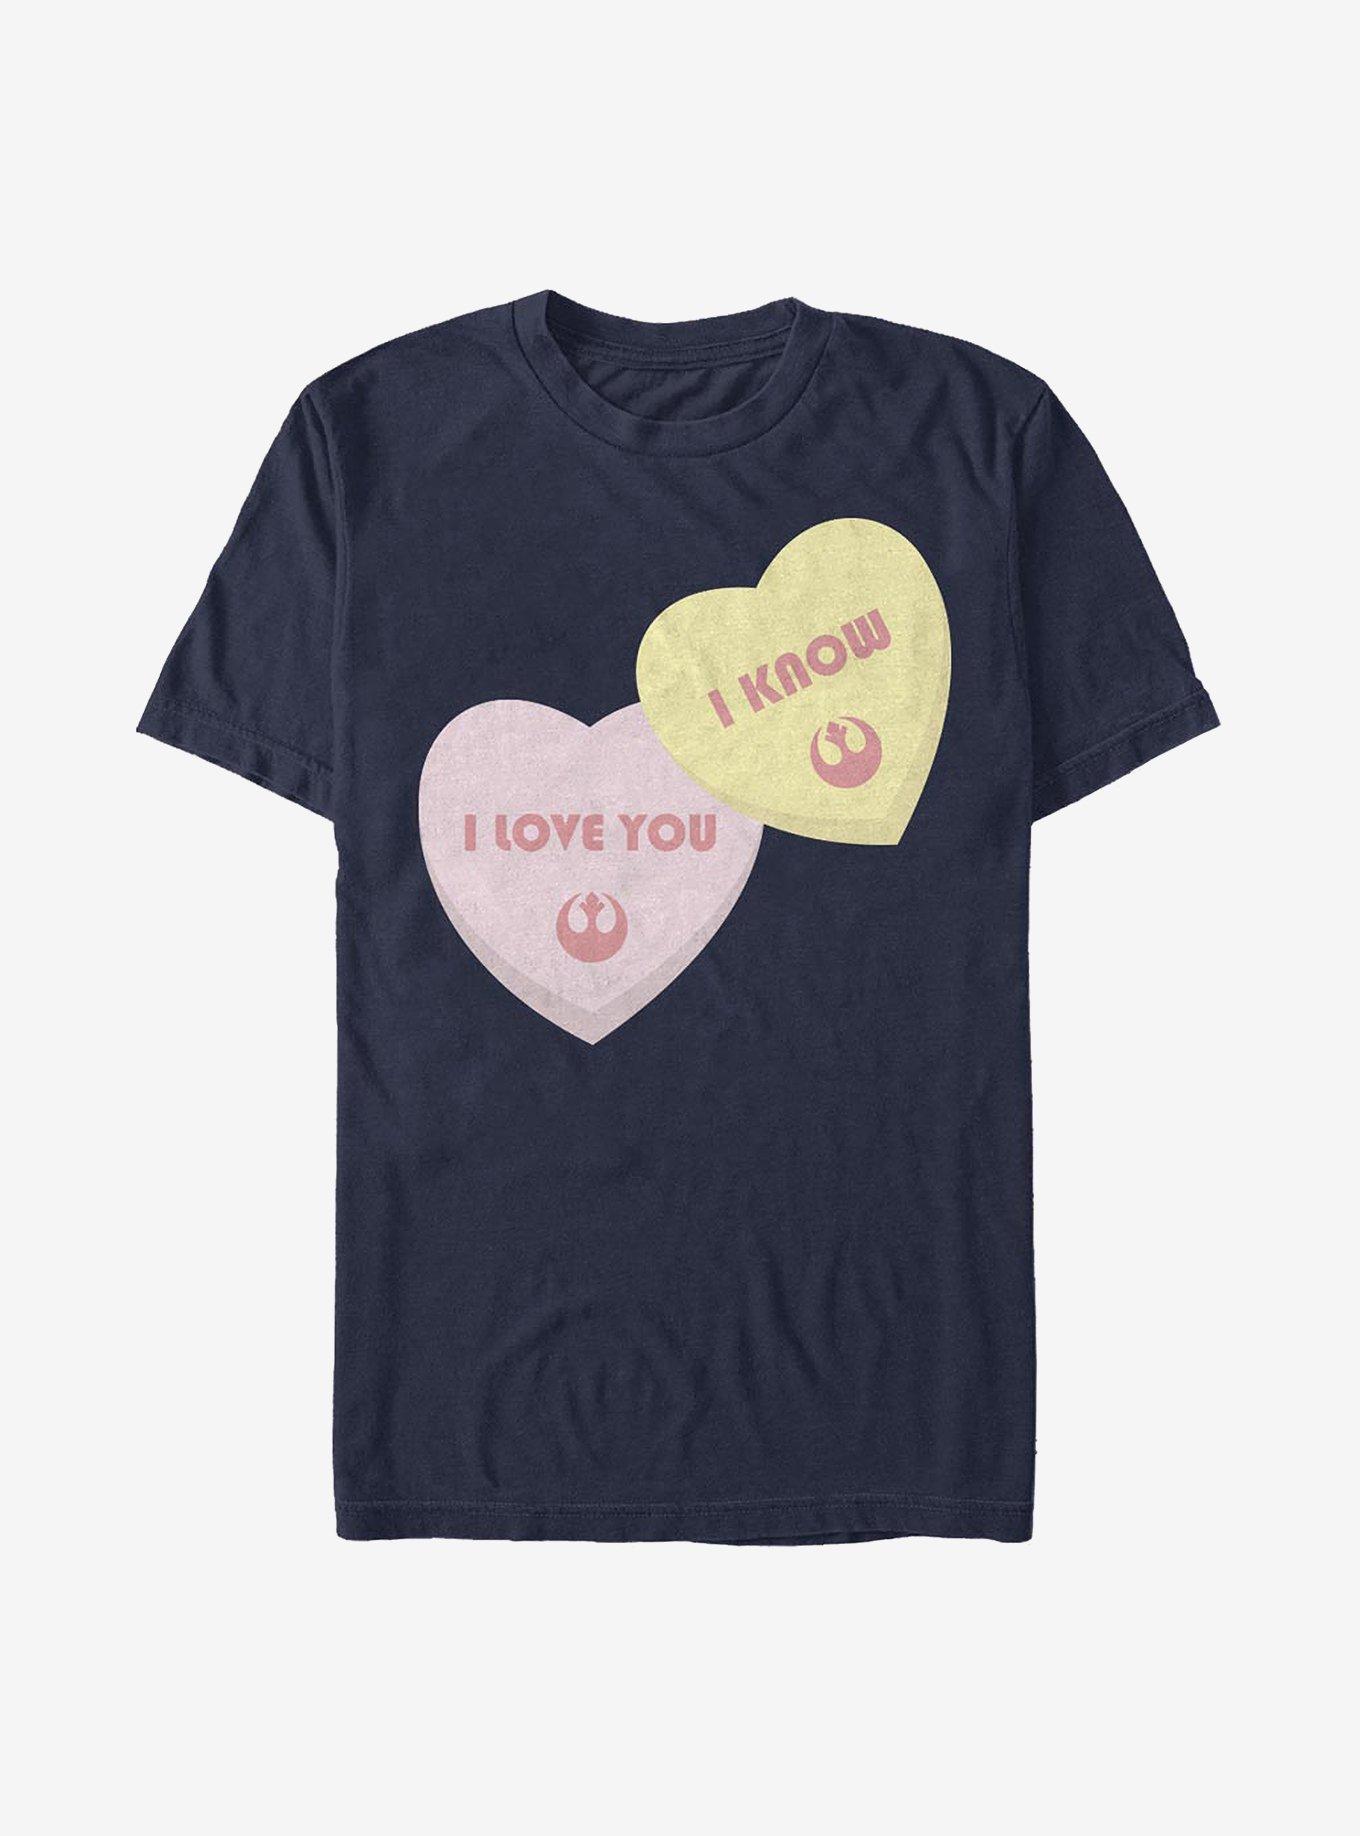 Star Wars Candy Hearts I Love You I Know T-Shirt, NAVY, hi-res